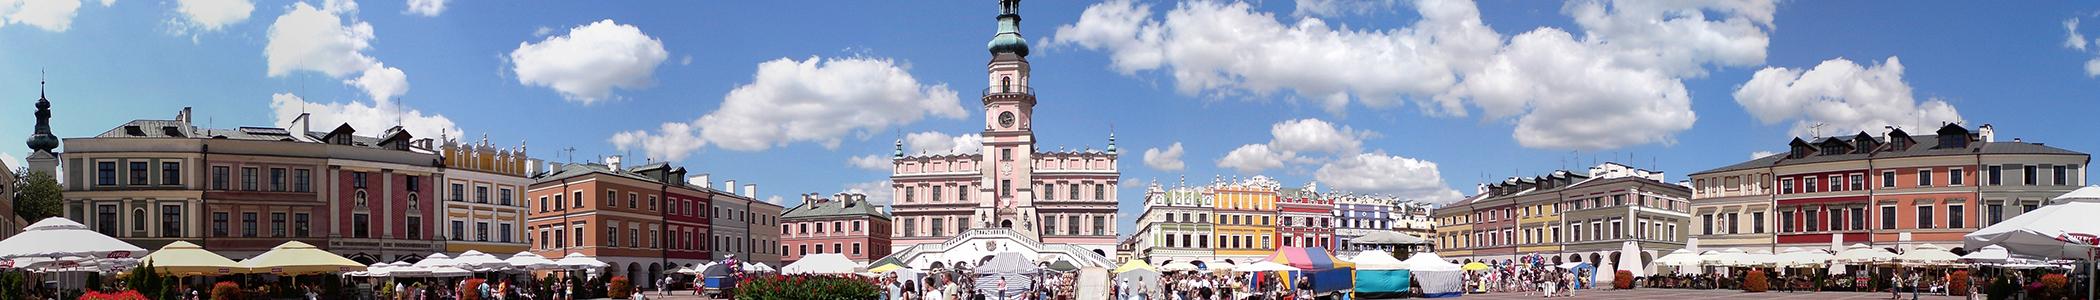 Banner image for Zamość on GigsGuide